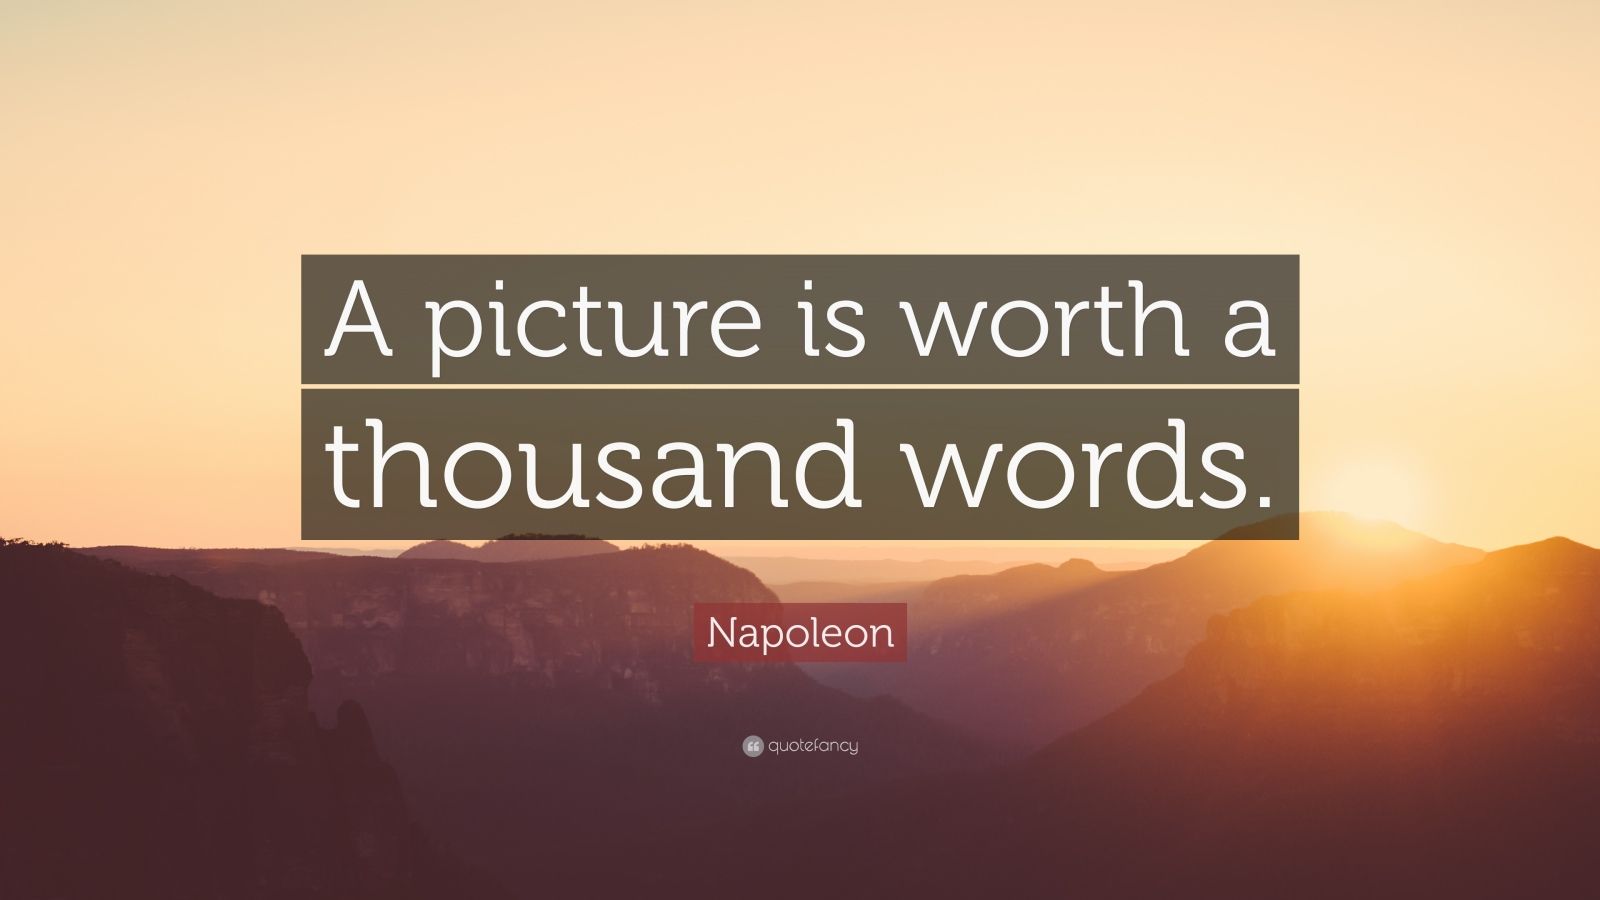 Napoleon Quote: “A picture is worth a thousand words.”